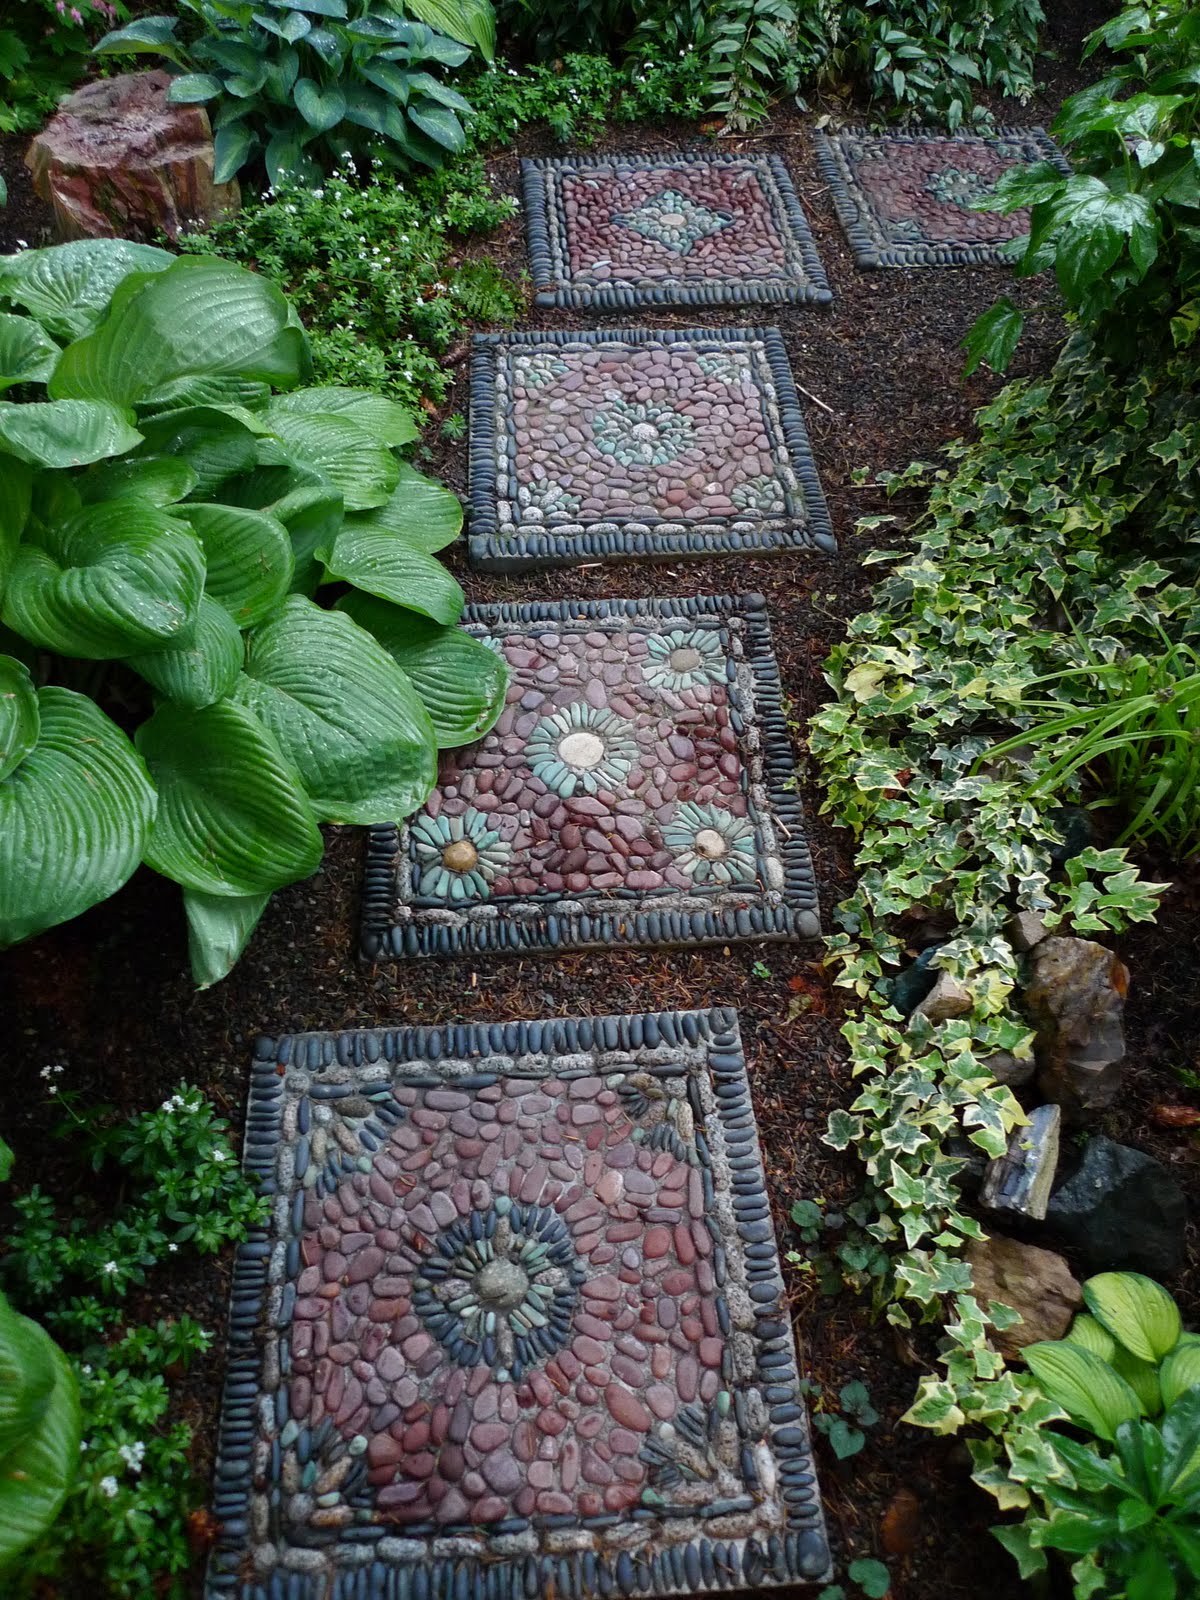 30 Beautiful DIY Stepping Stone Ideas To Decorate Garden